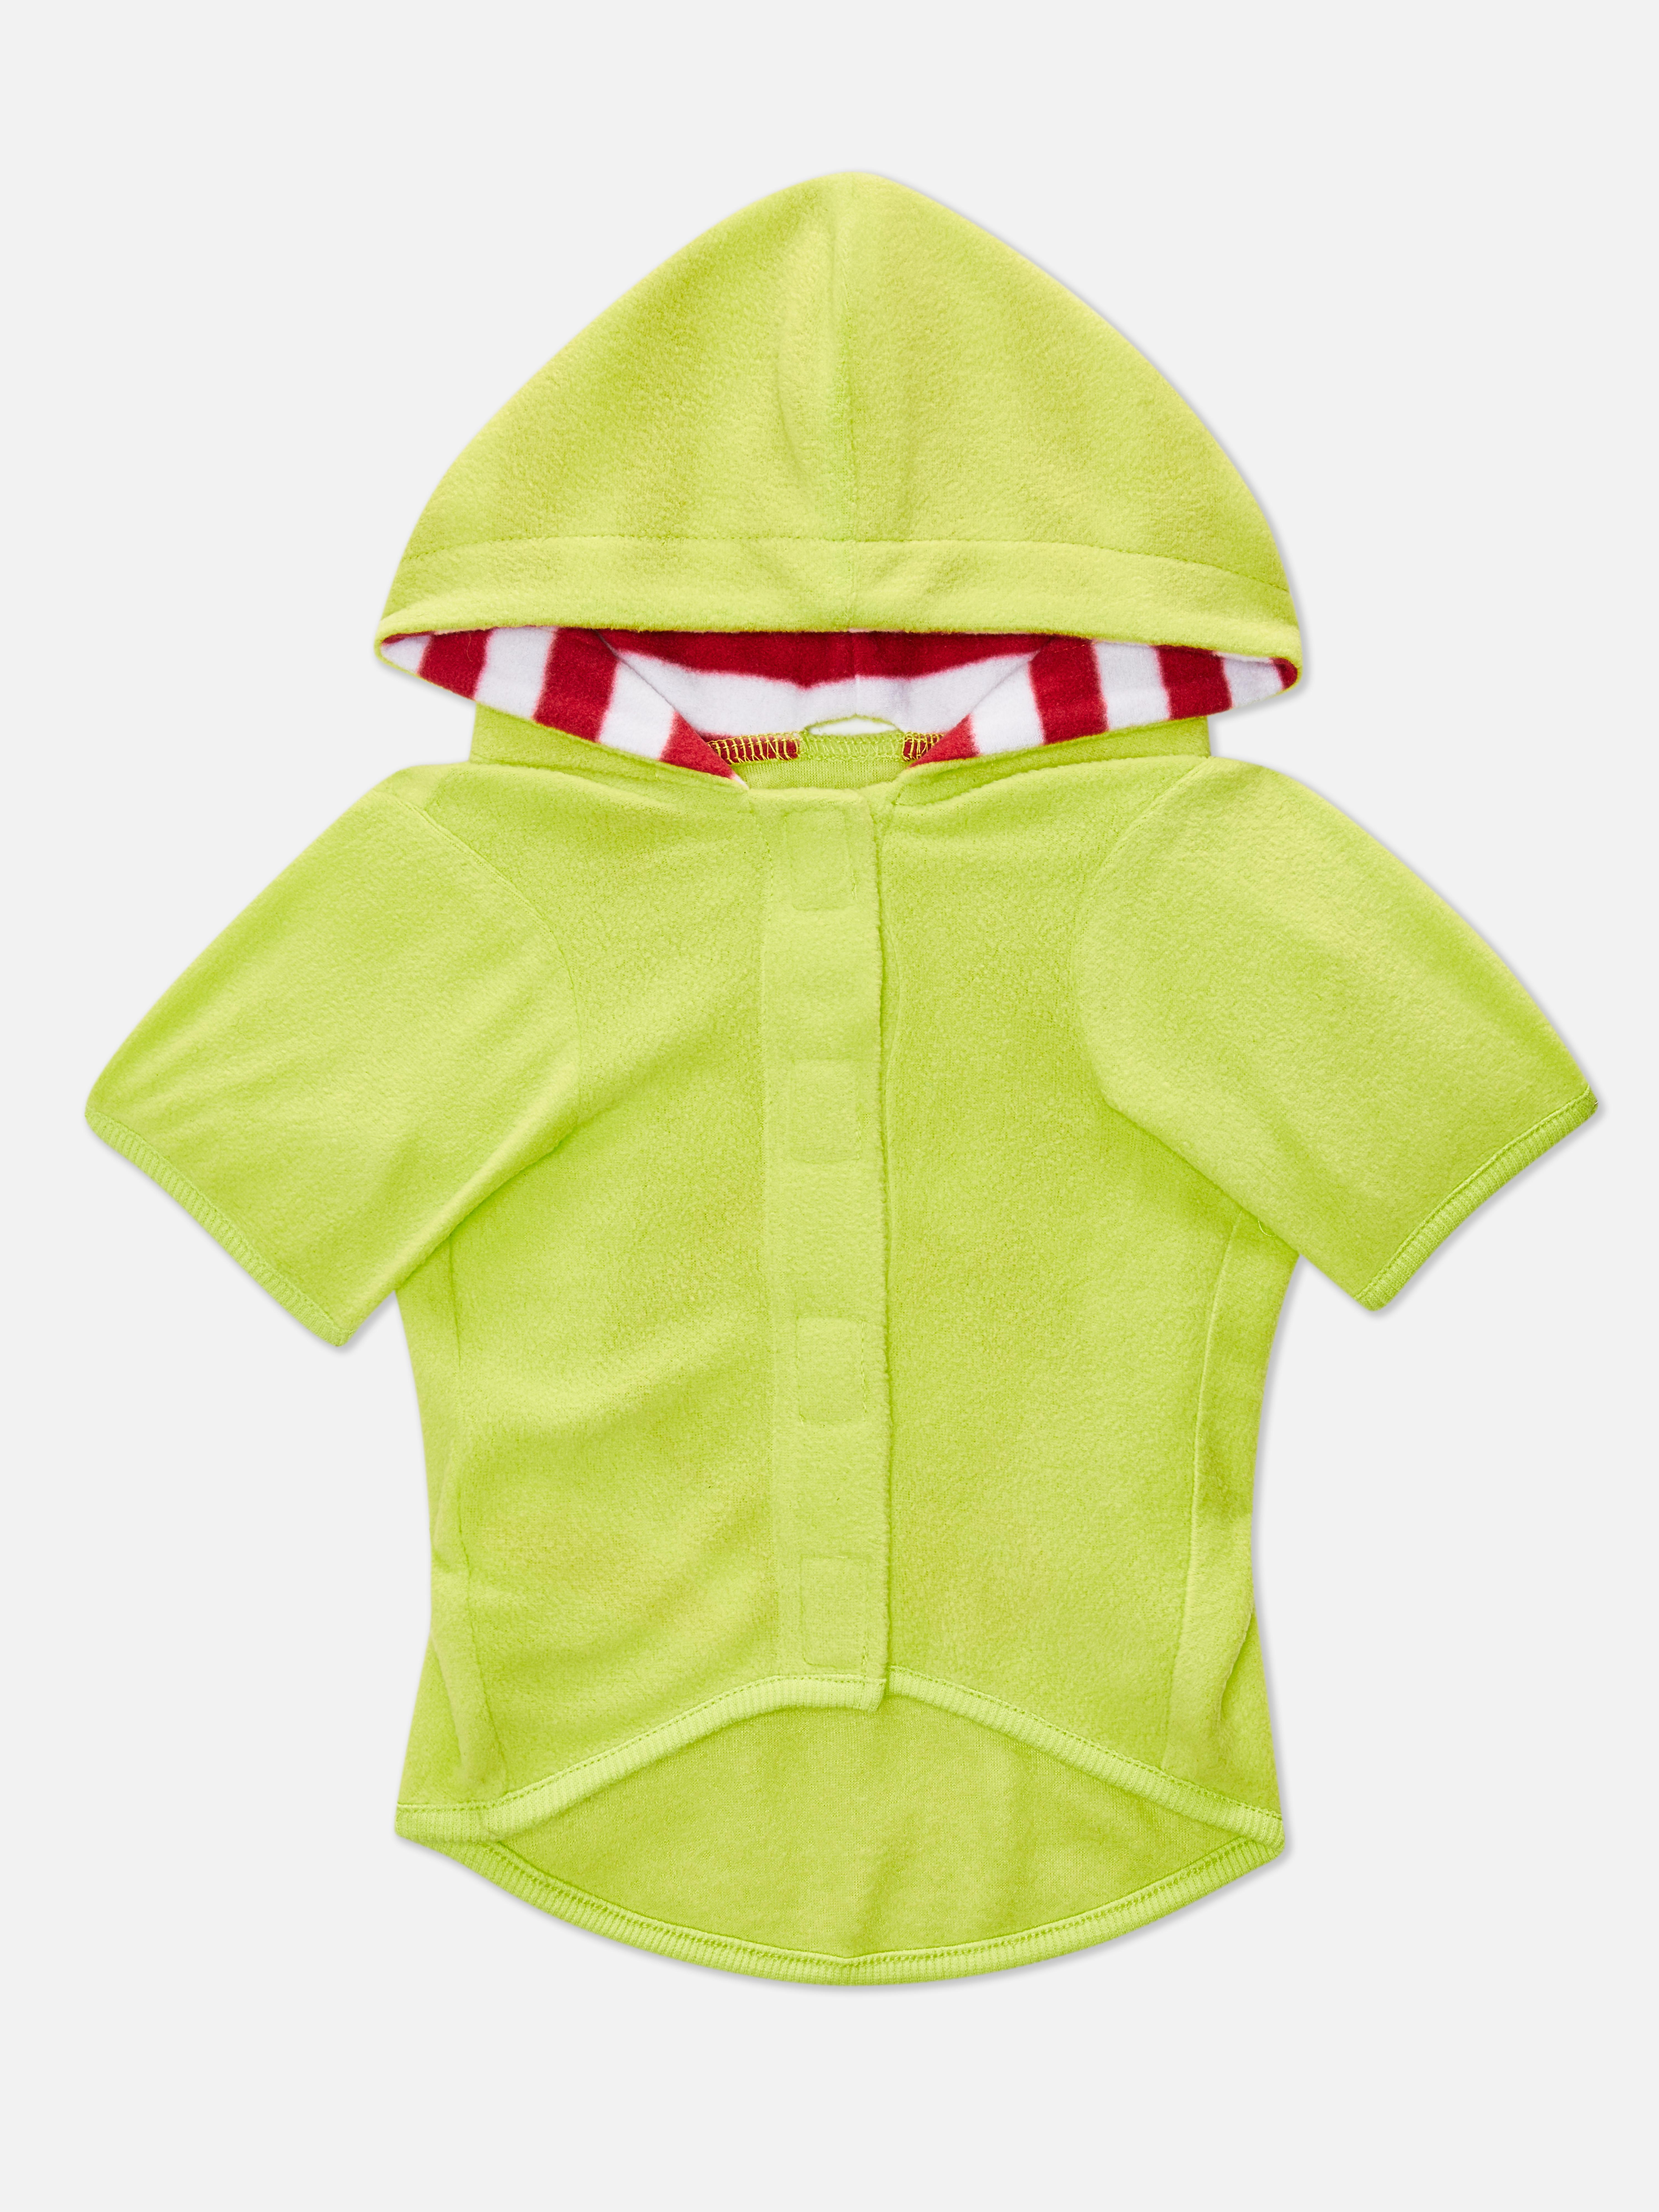 The Grinch Pet Outfit